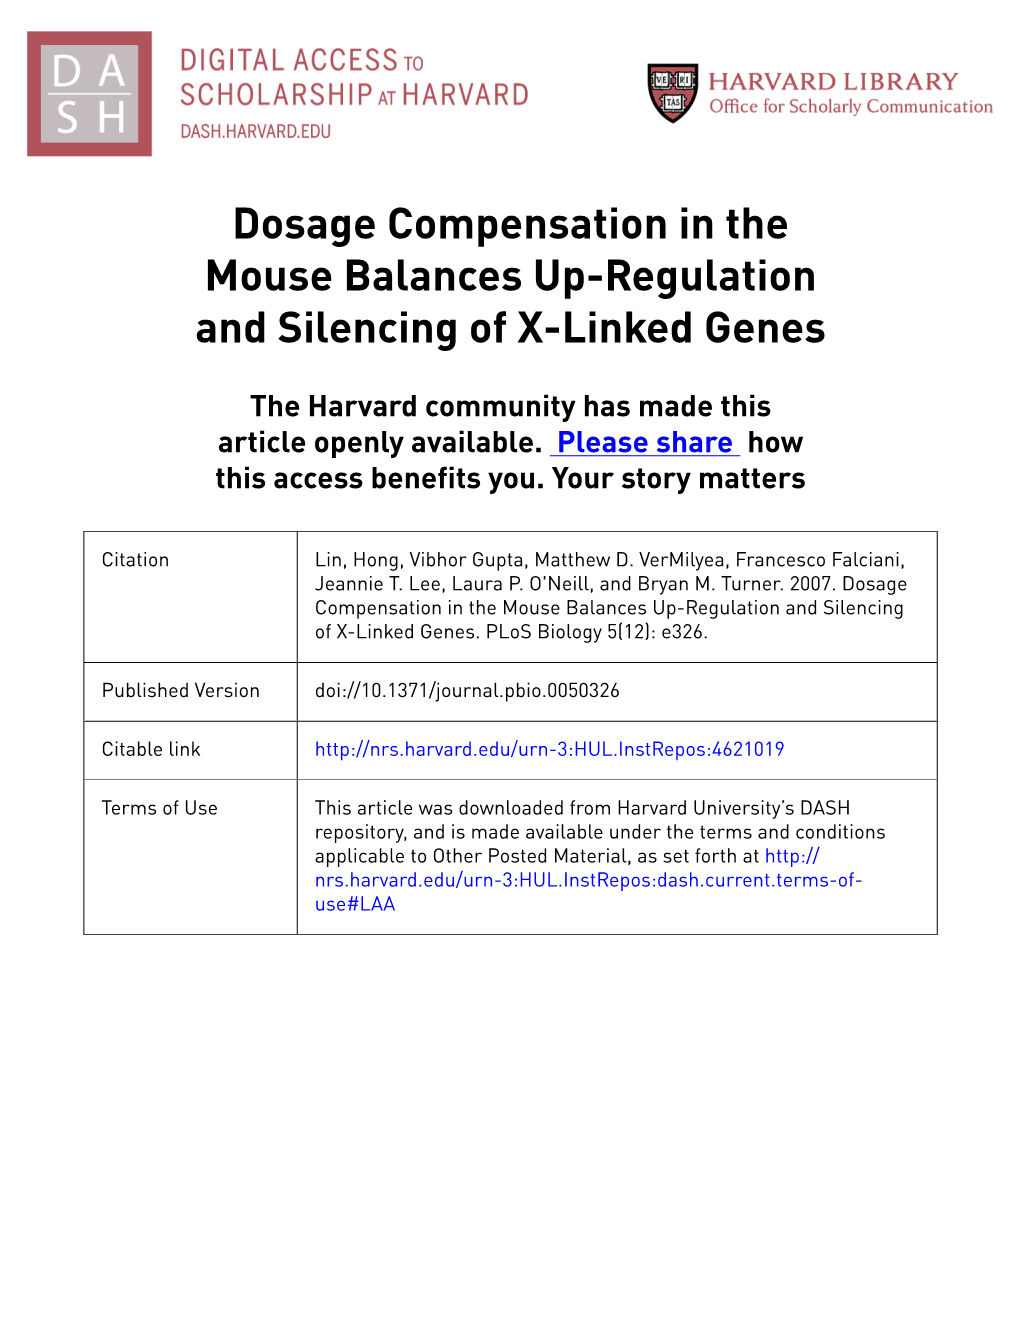 Dosage Compensation in the Mouse Balances Up-Regulation and Silencing of X-Linked Genes